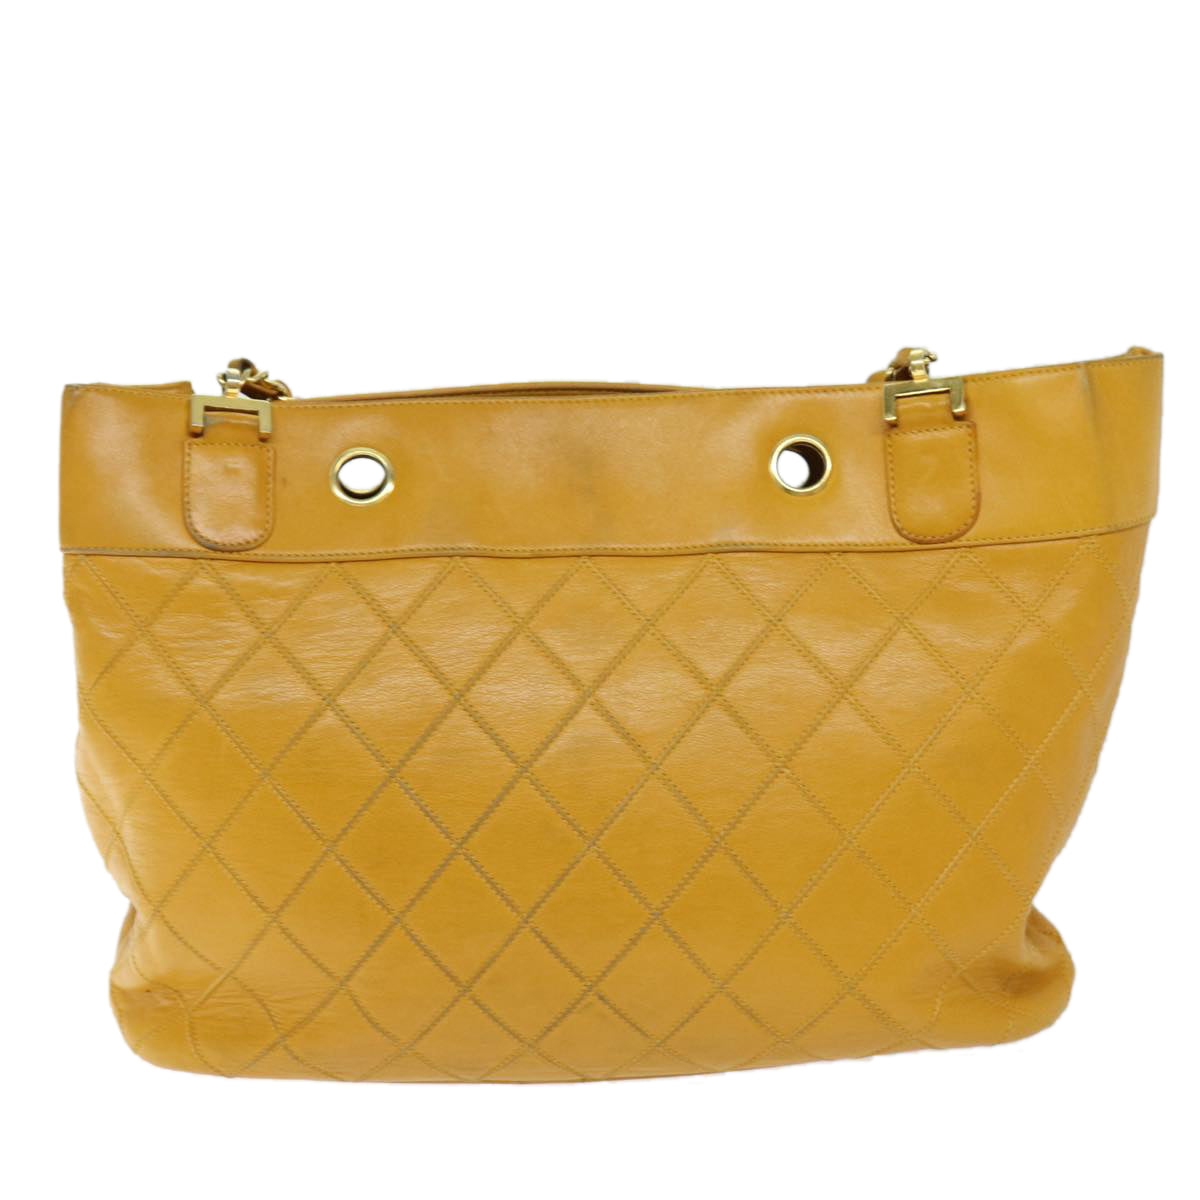 CHANEL Bicolole Chain Shoulder Bag Leather Yellow CC Auth bs13881 - 0